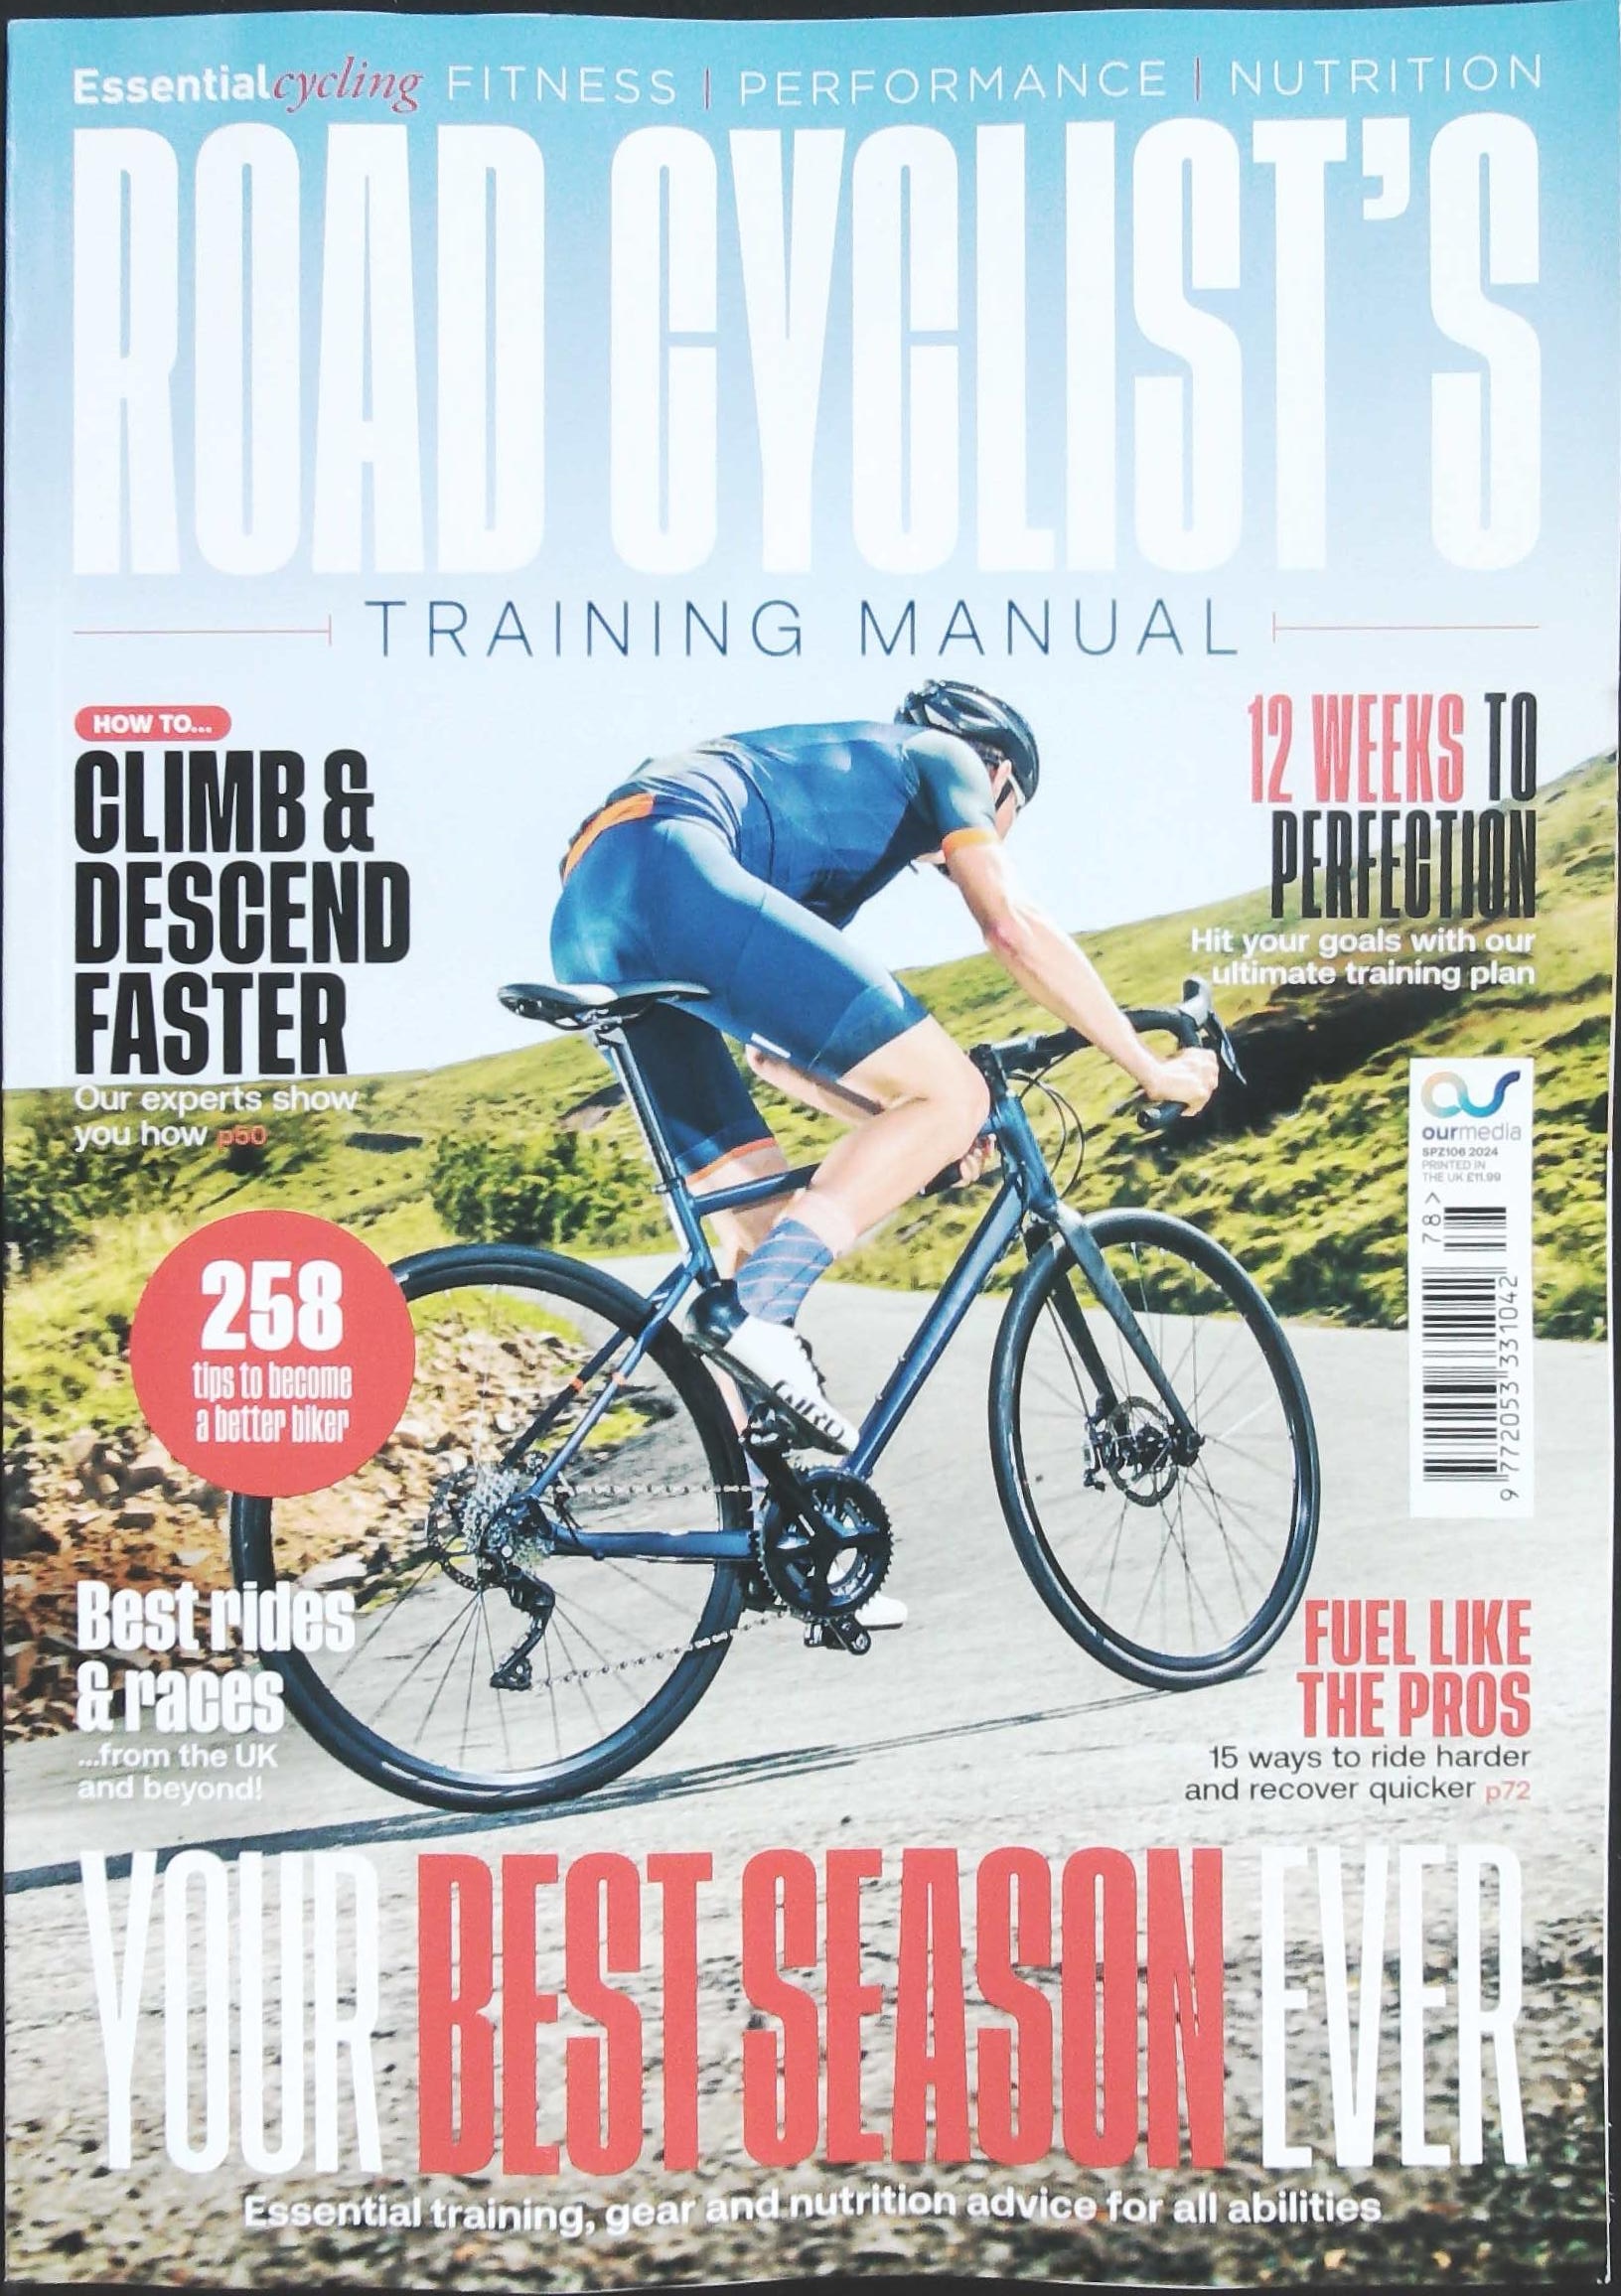 ESSENTIAL CYCLING SERIES